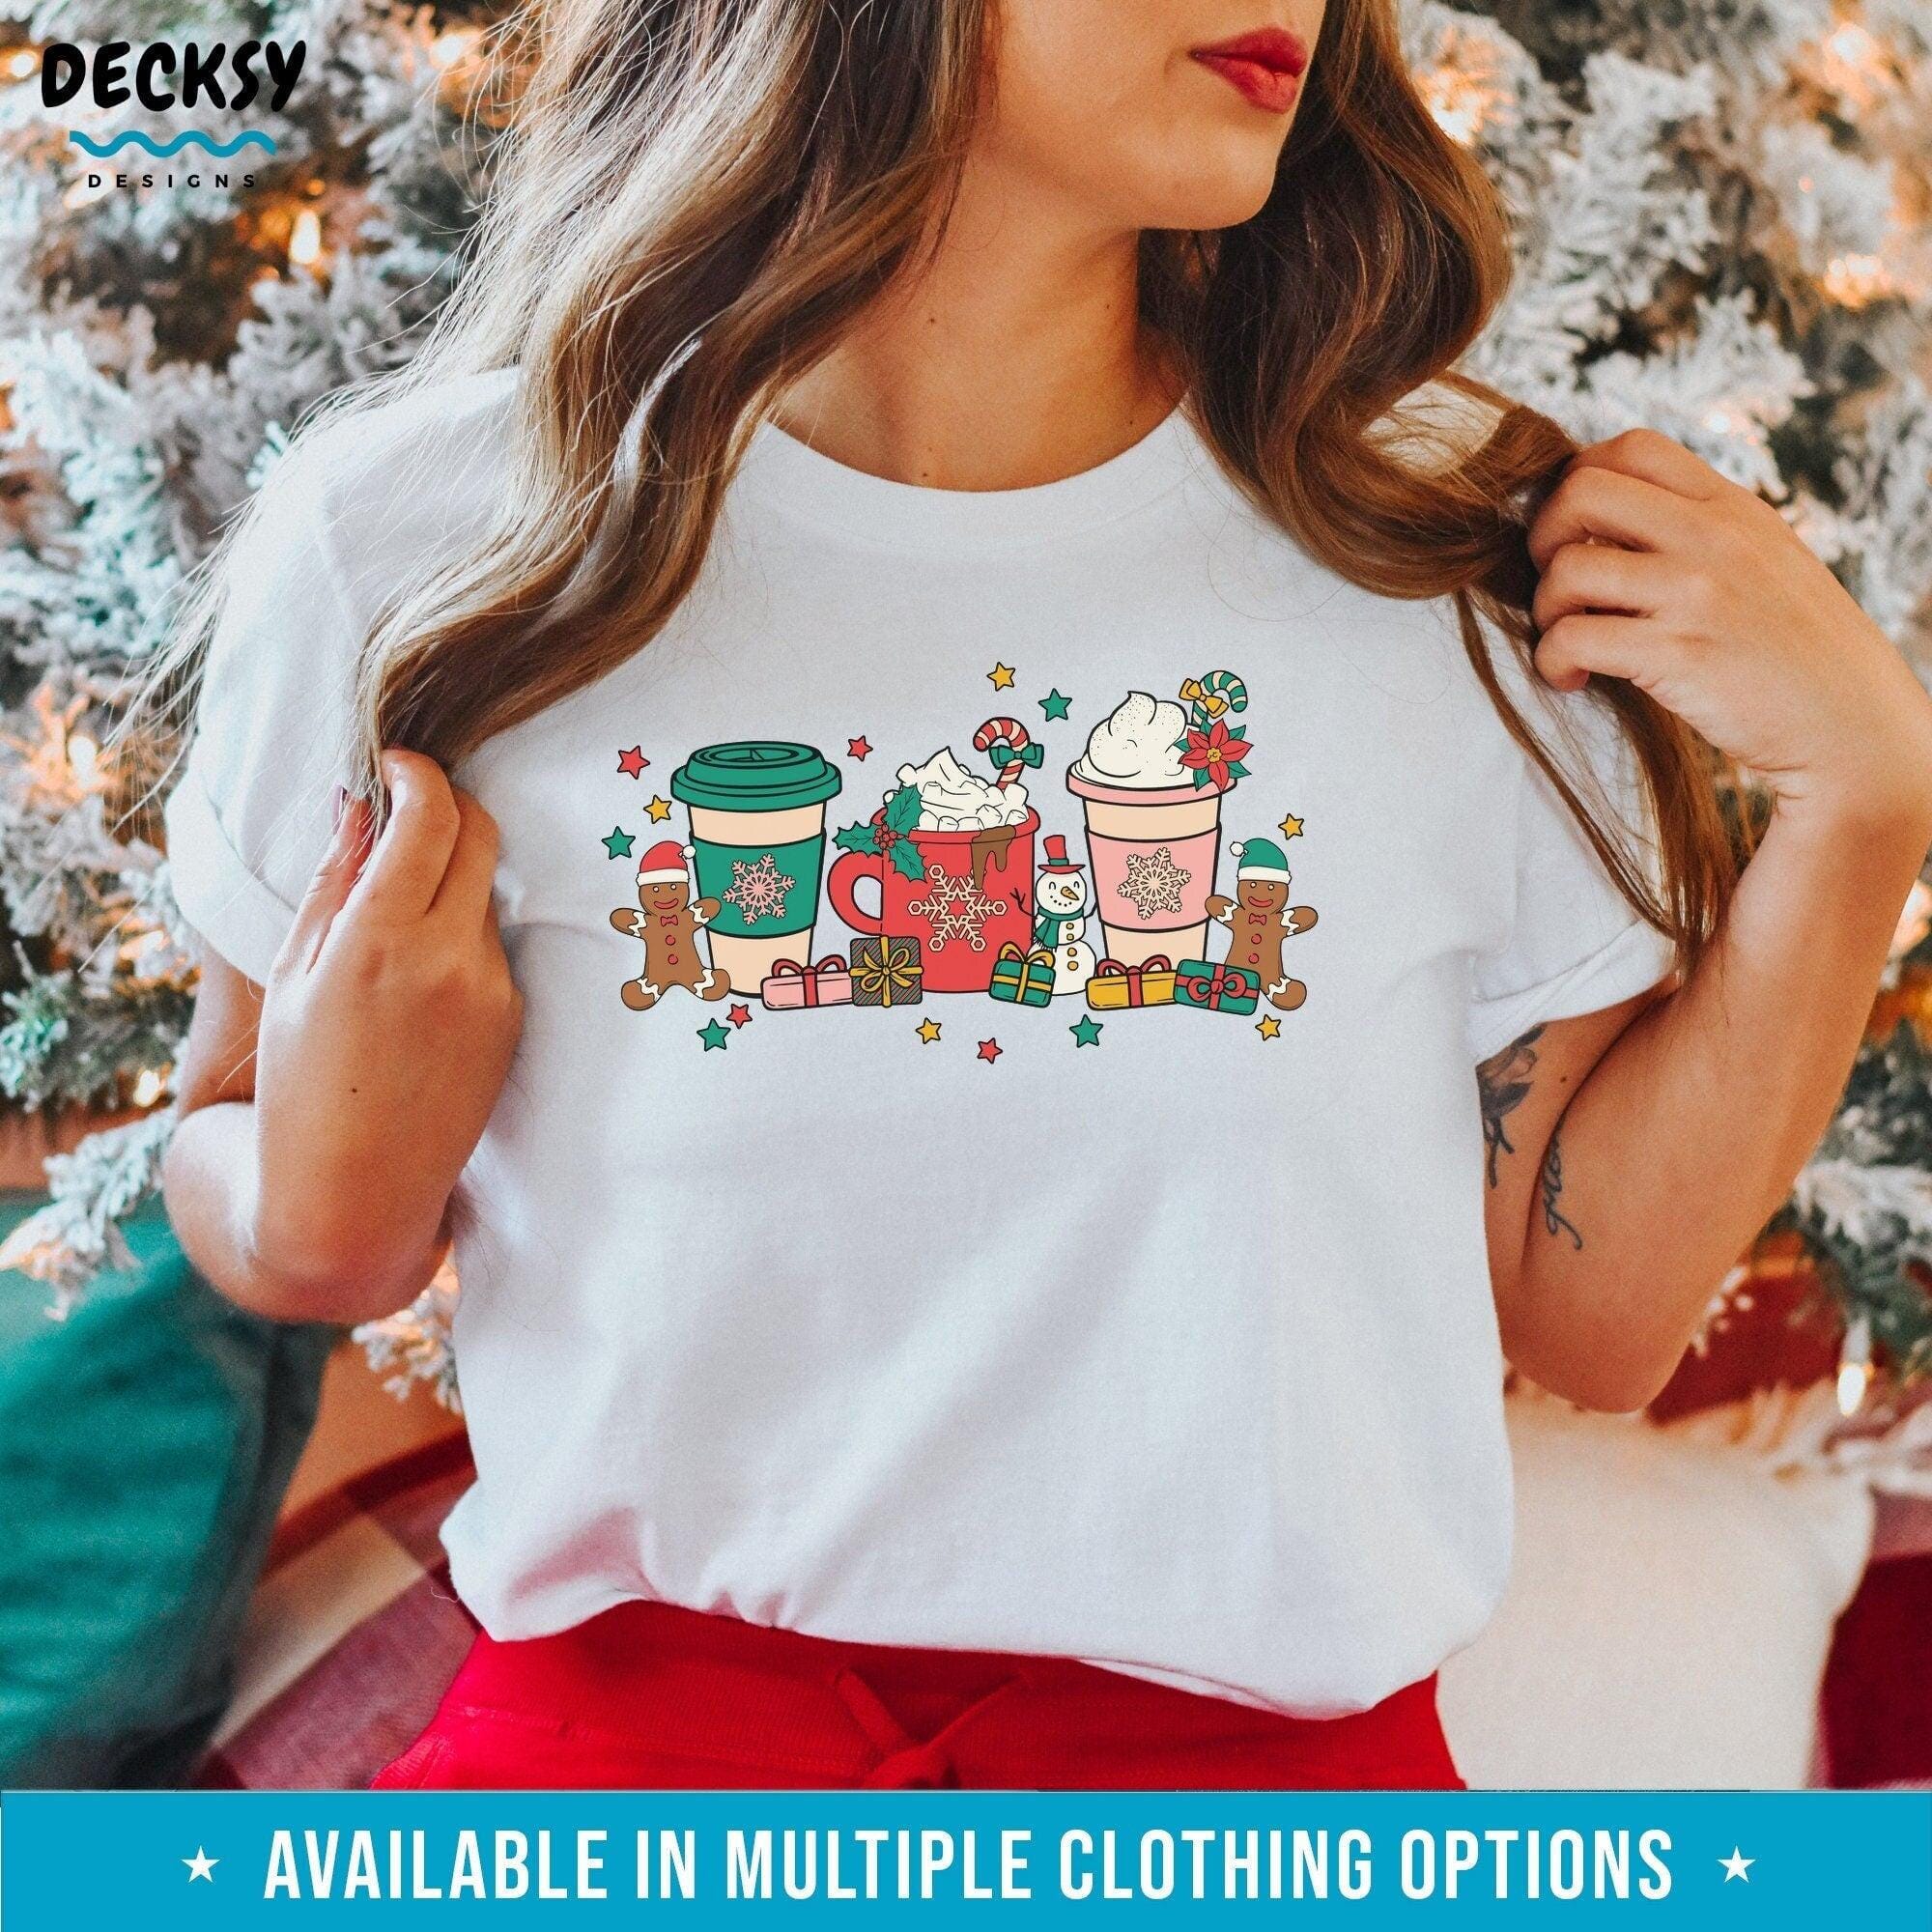 Christmas Coffee Shirt, Xmas Holiday Sweatshirt Hoodie, Gift for Coffee Lover-Clothing:Gender-Neutral Adult Clothing:Tops & Tees:T-shirts:Graphic Tees-DecksyDesigns